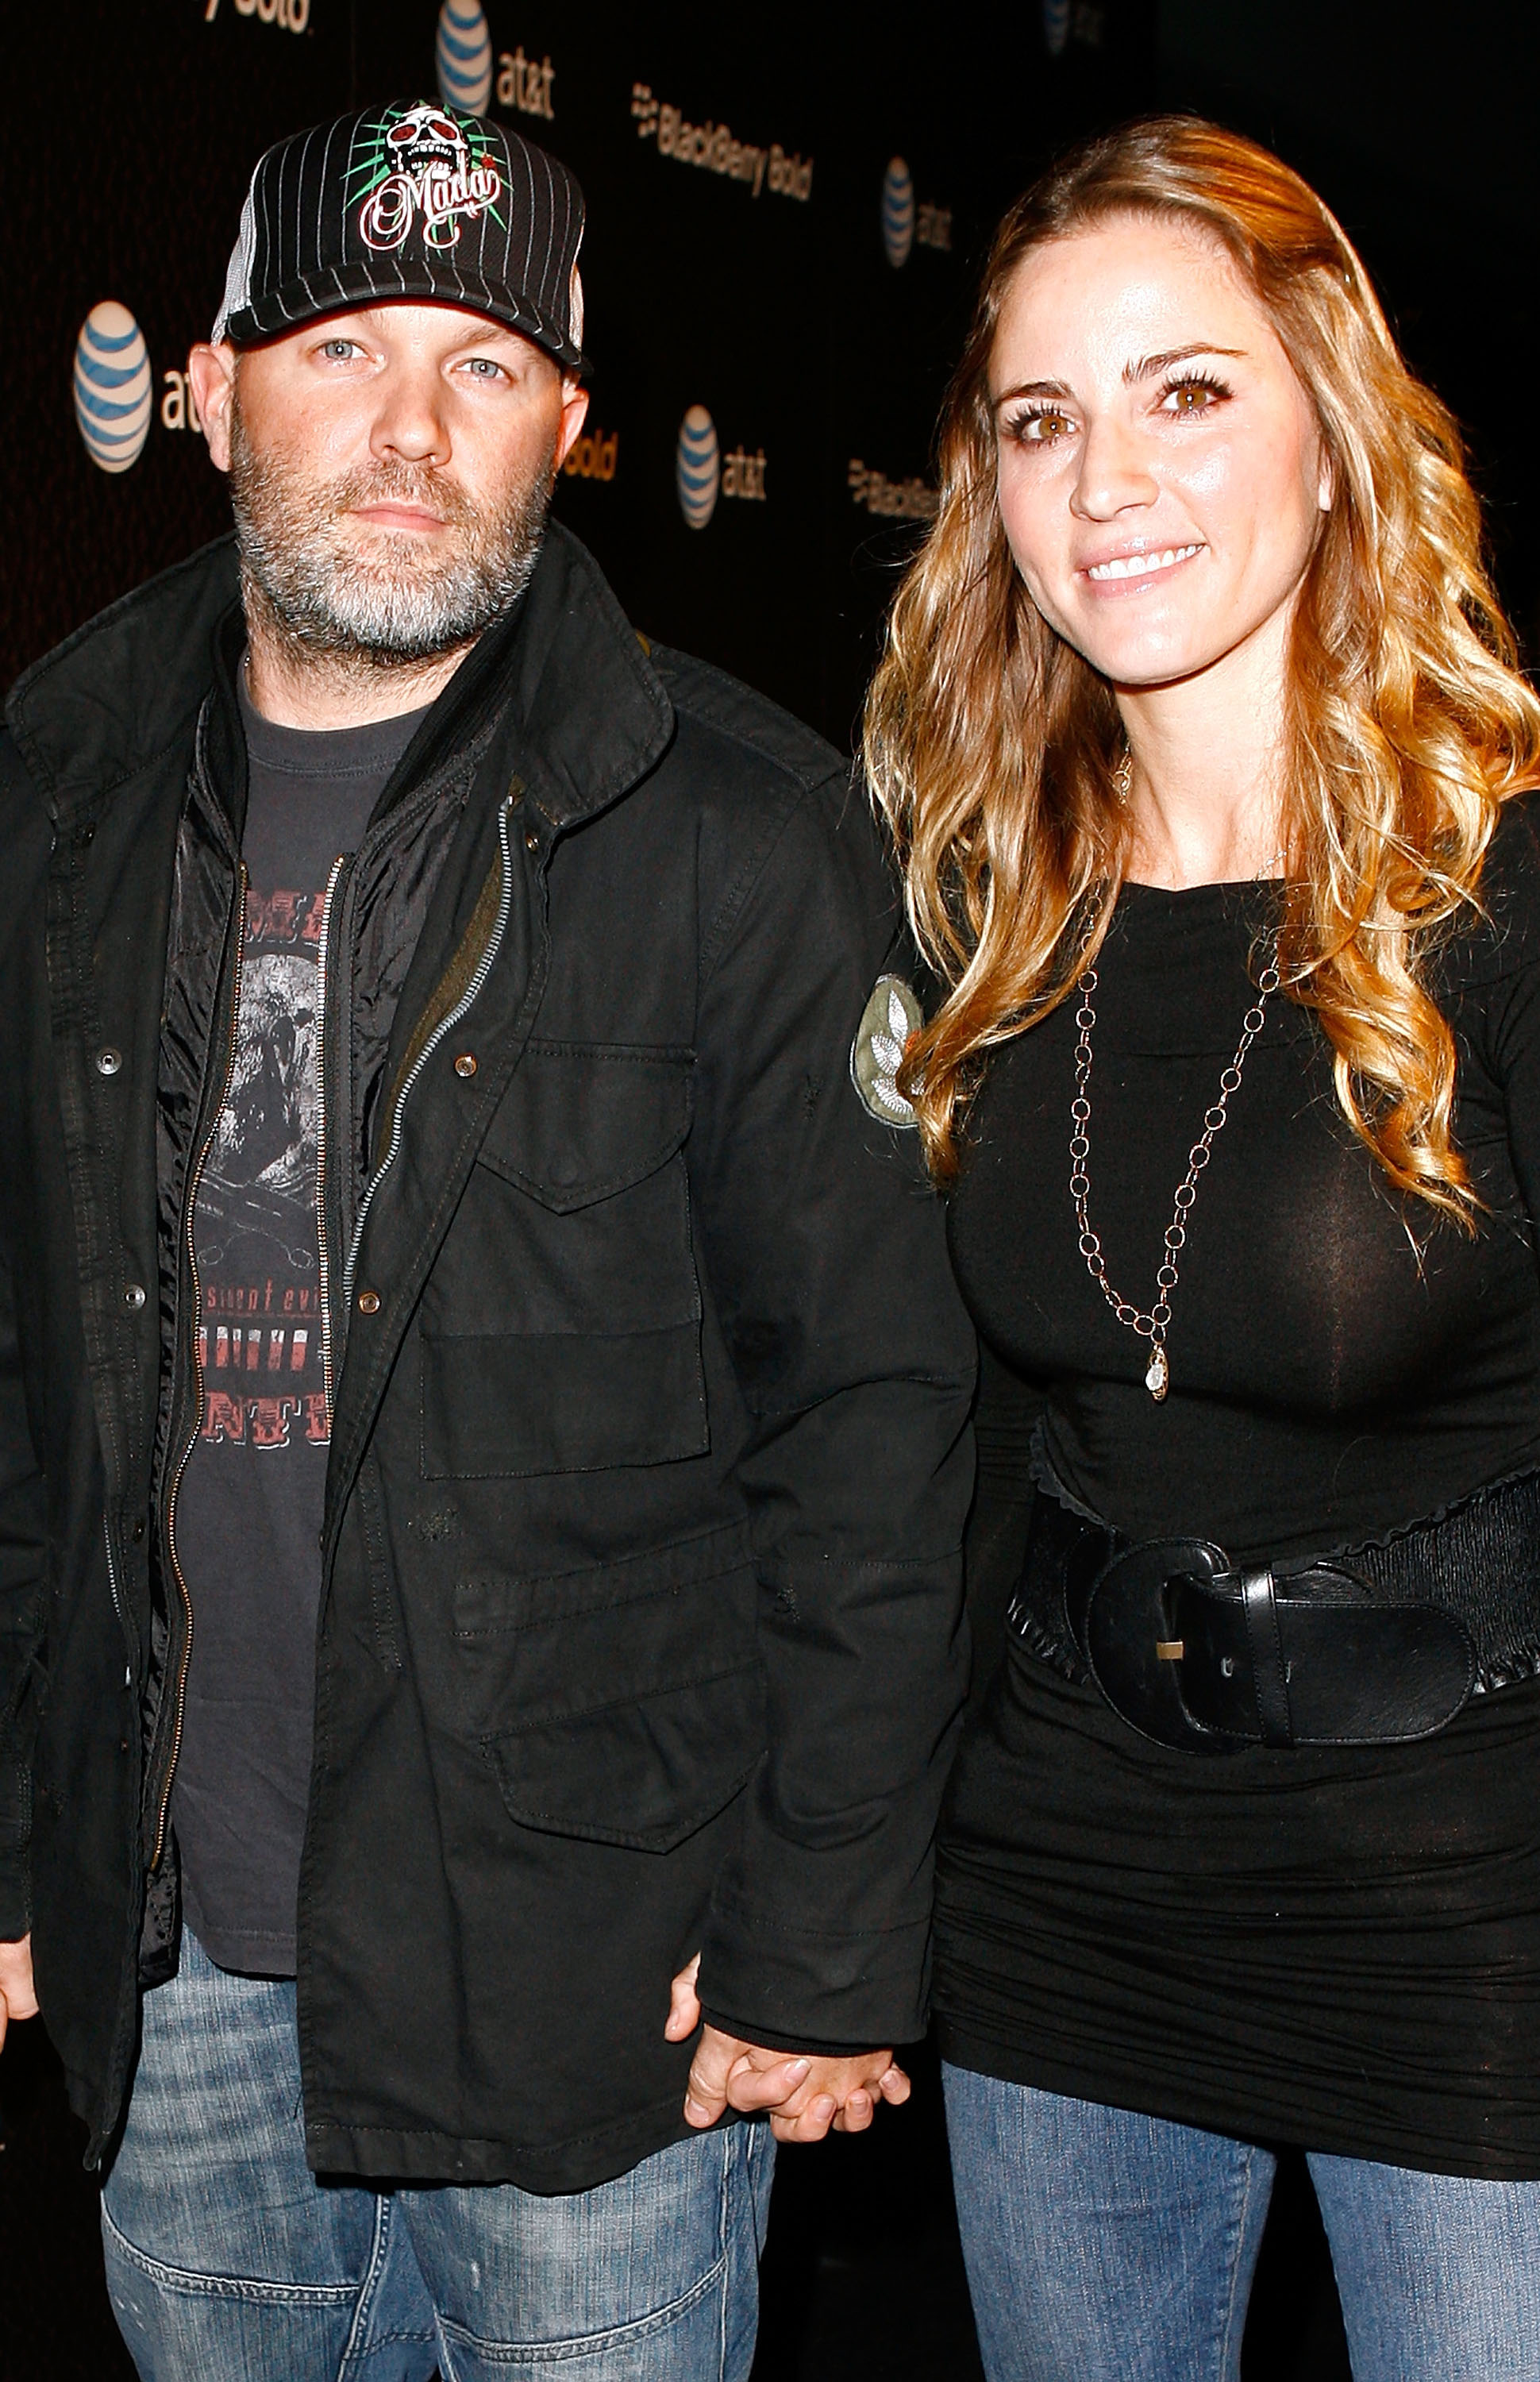 Fred Durst and Esther Nazarov at the Blackberry Bold launch party on October 30, 2008, in Beverly Hills, California. | Source: Getty Images